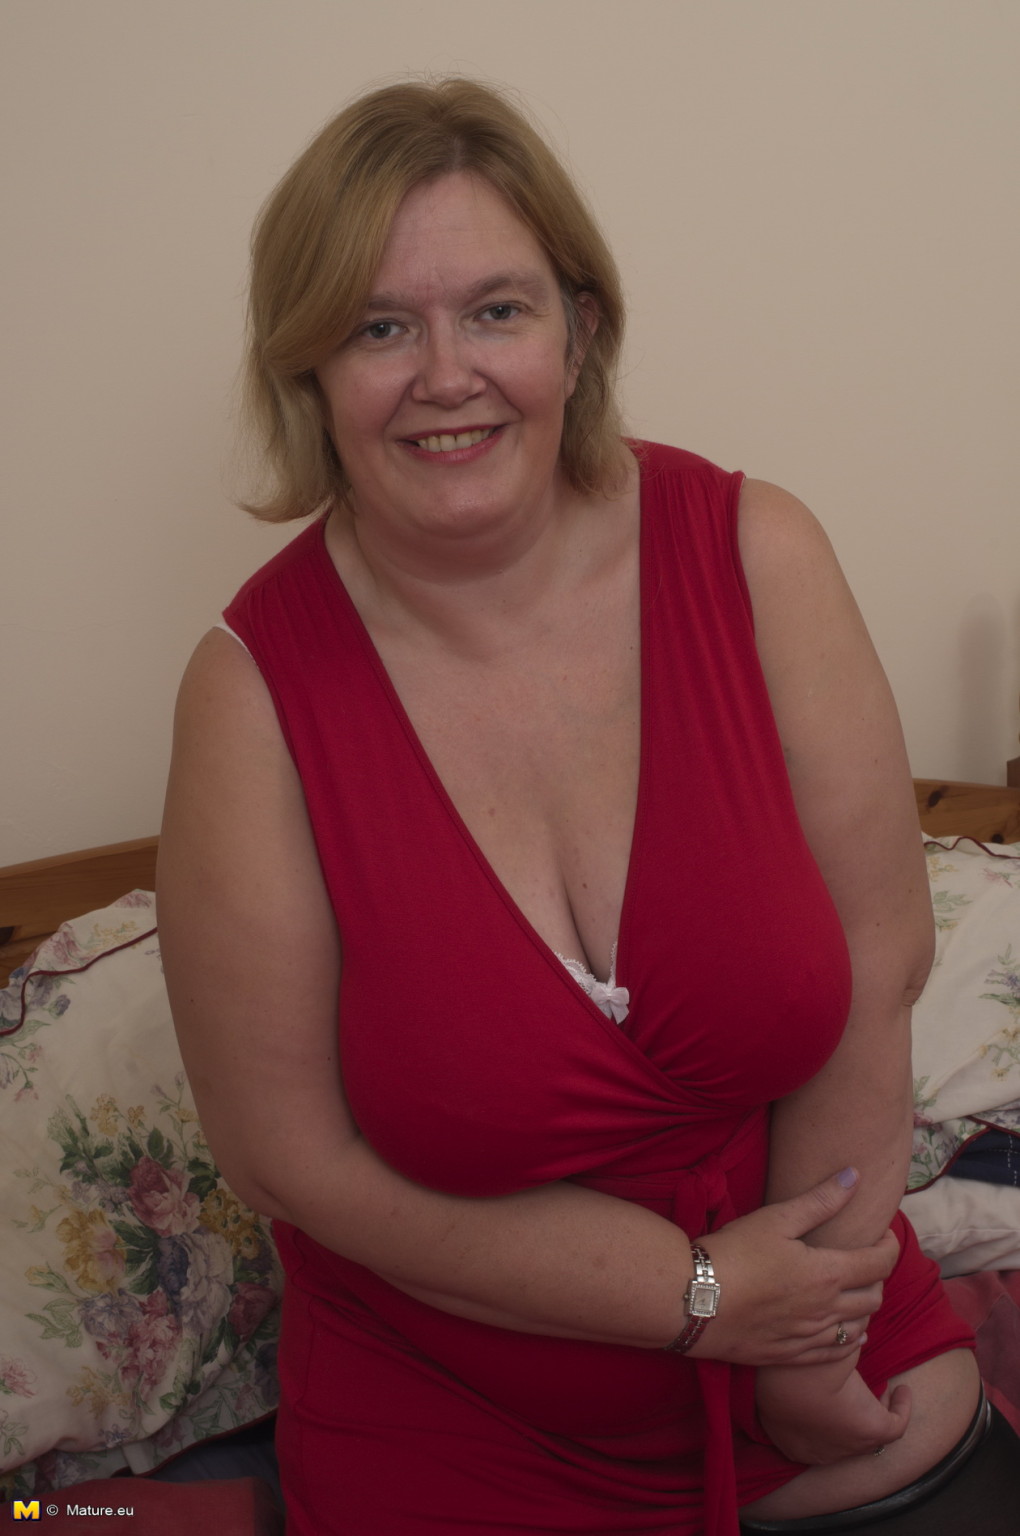 Large British mature lady with big natural tits getting dirty #71728167